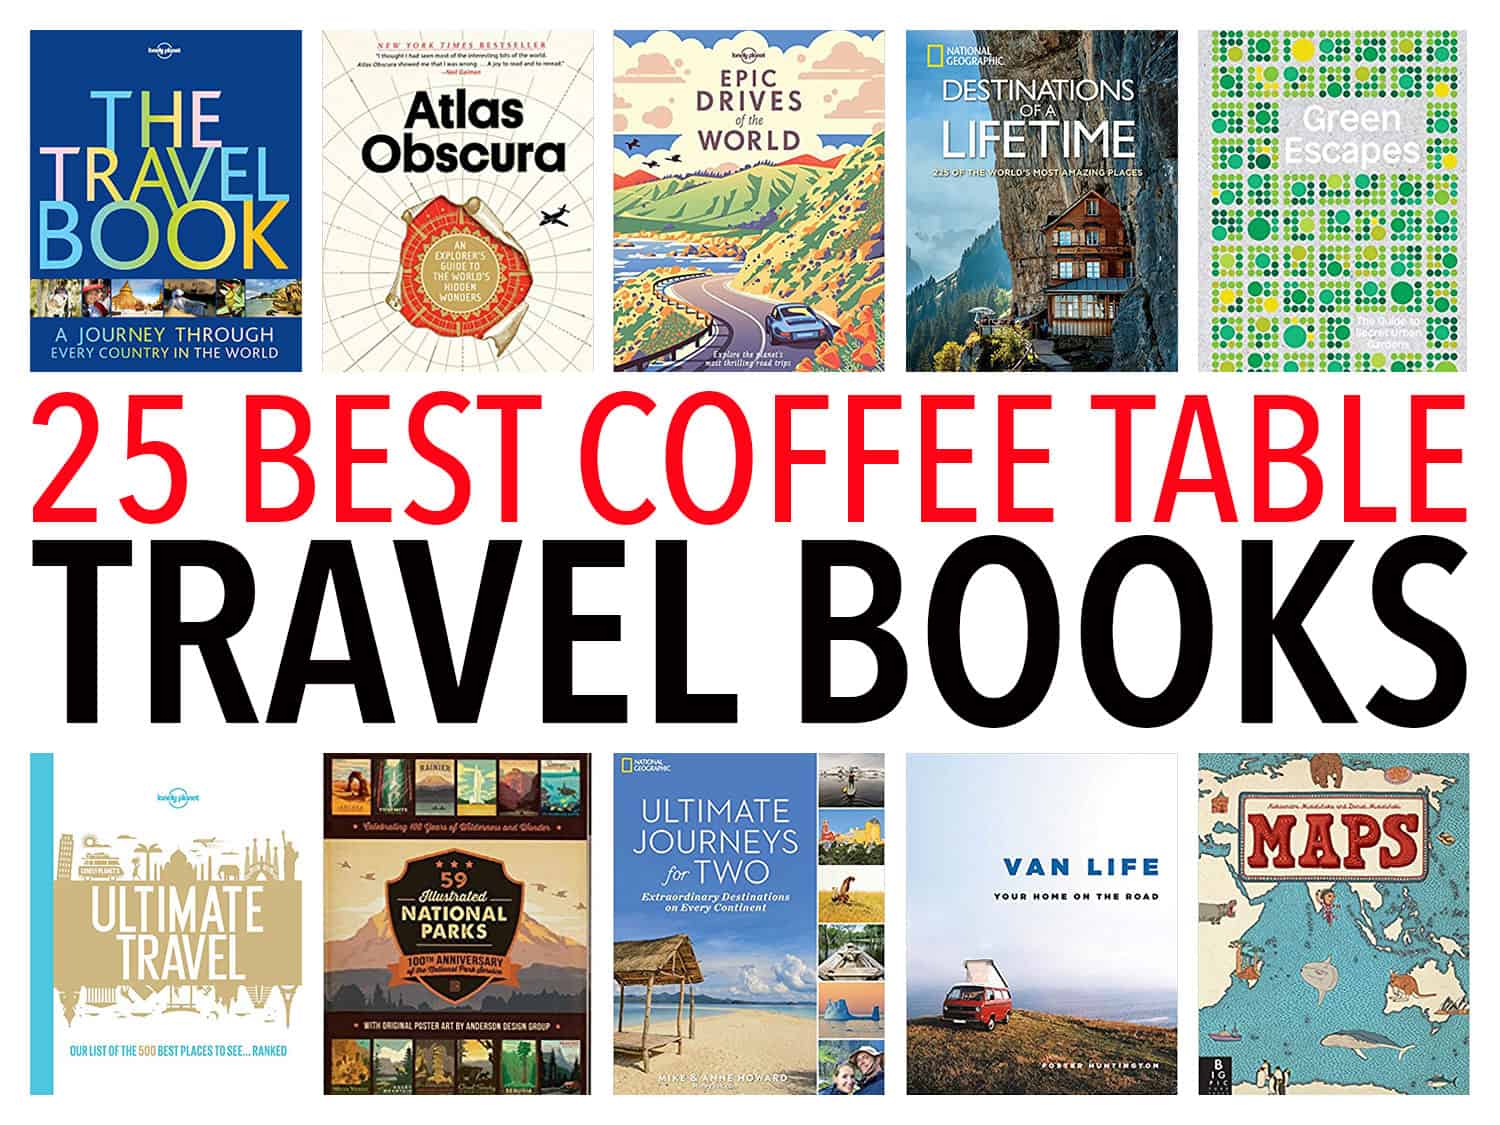 17 Best Travel Coffee Table Books to Give (and Keep) This Year